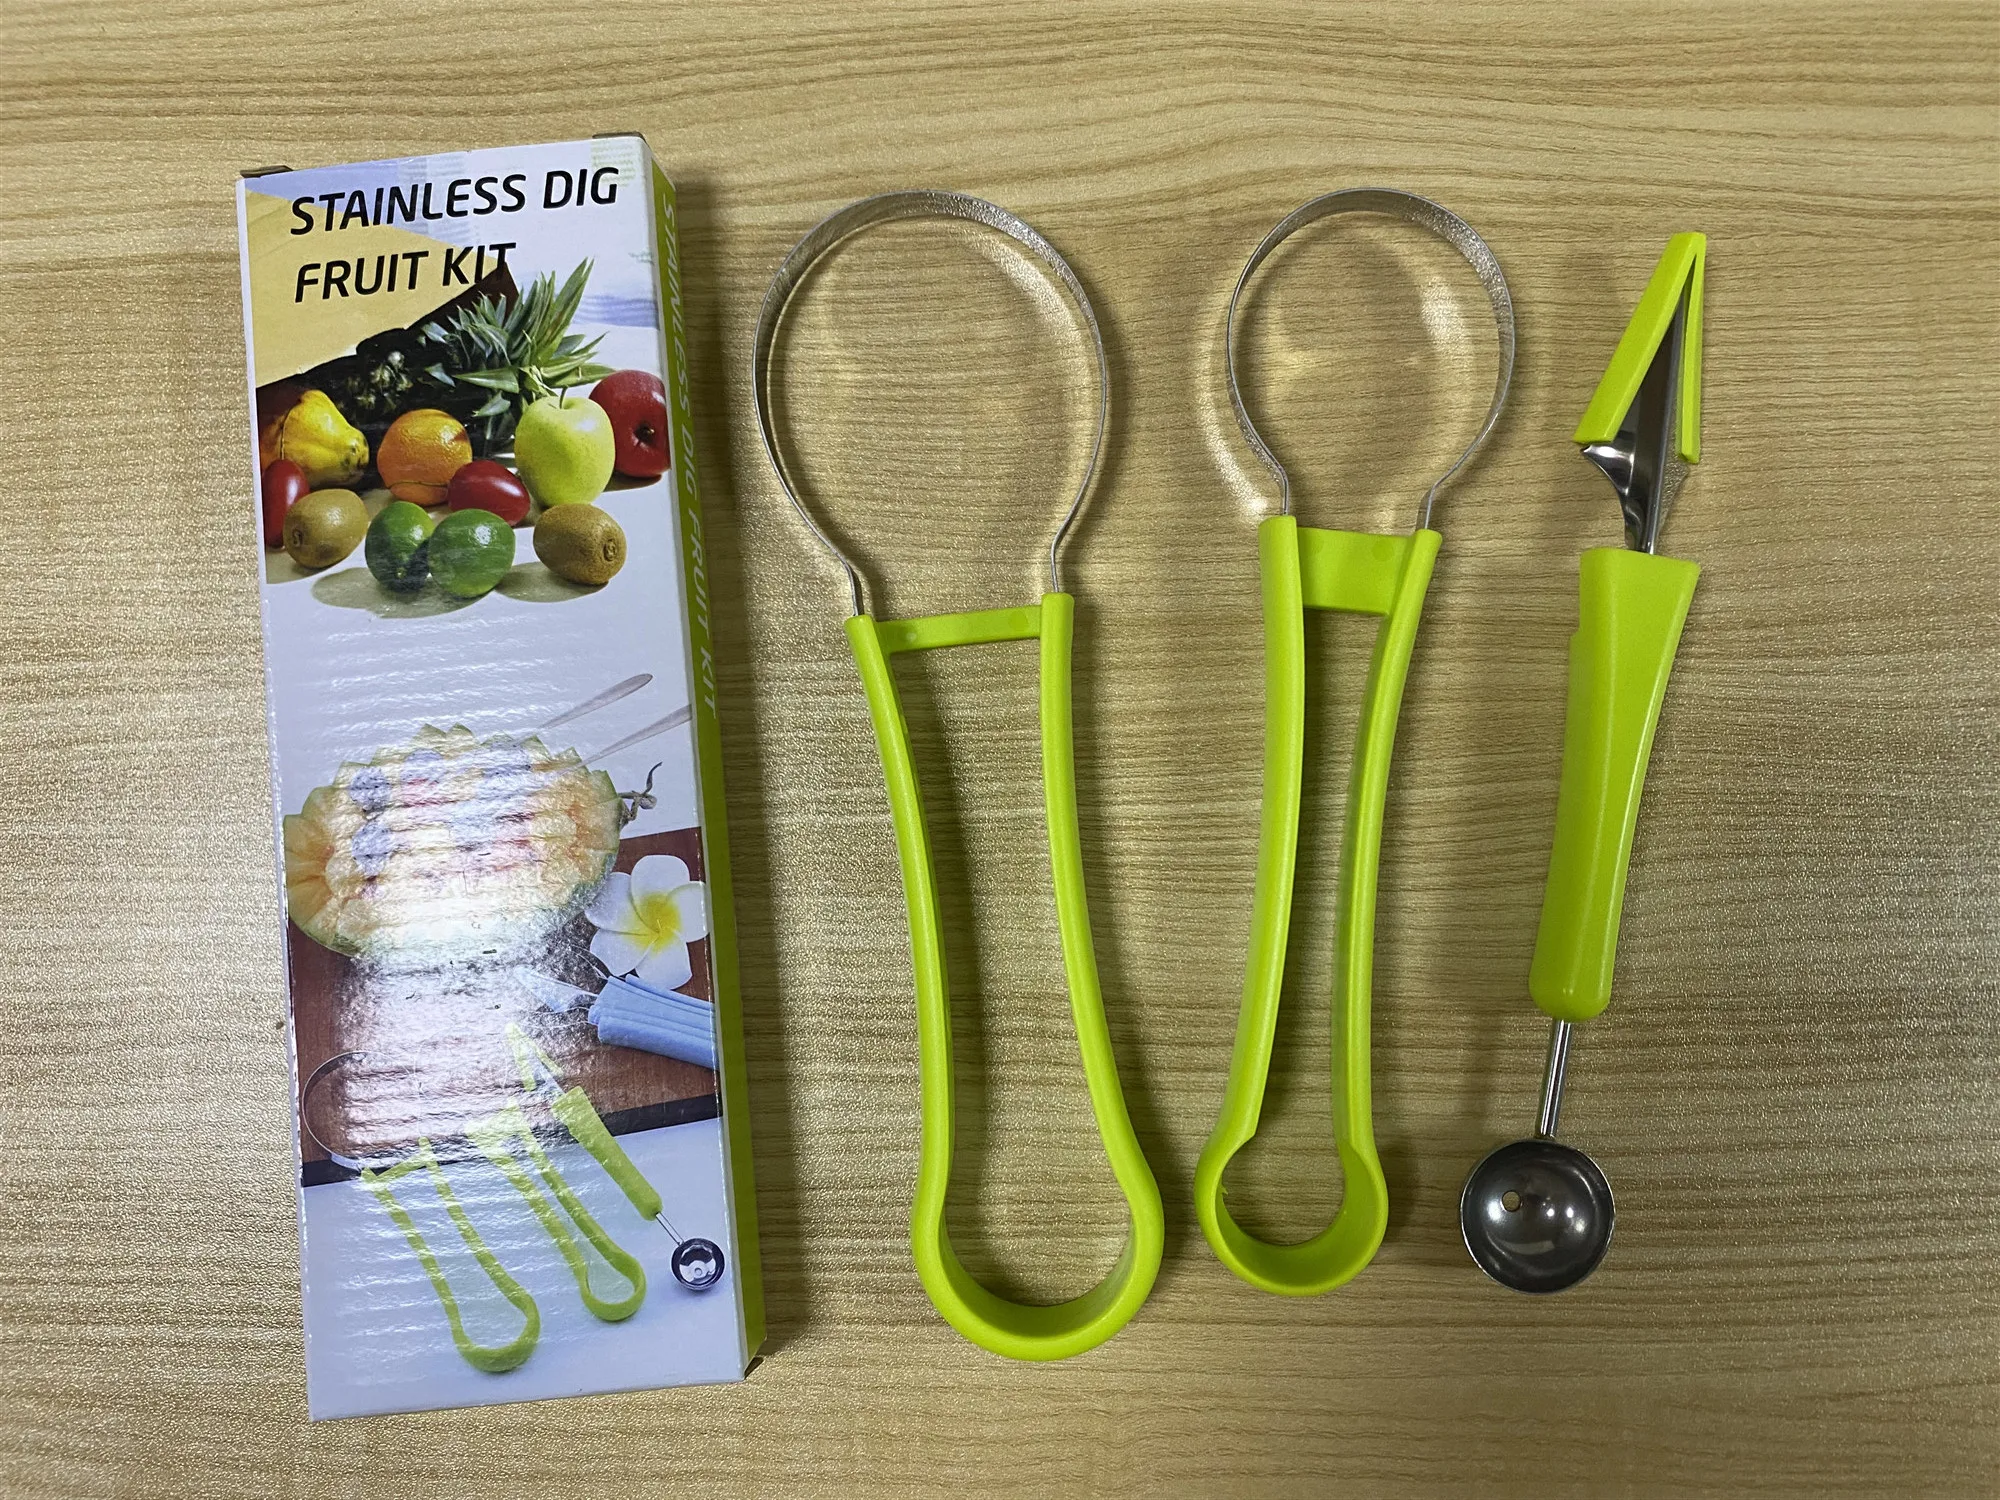 Fruit Tool Set Fruit Carving, Fruit Scoop Watermelon Ball Cutter Food Cantaloupe Peeler, Used for Fruit Decoration Kitchen Fruit